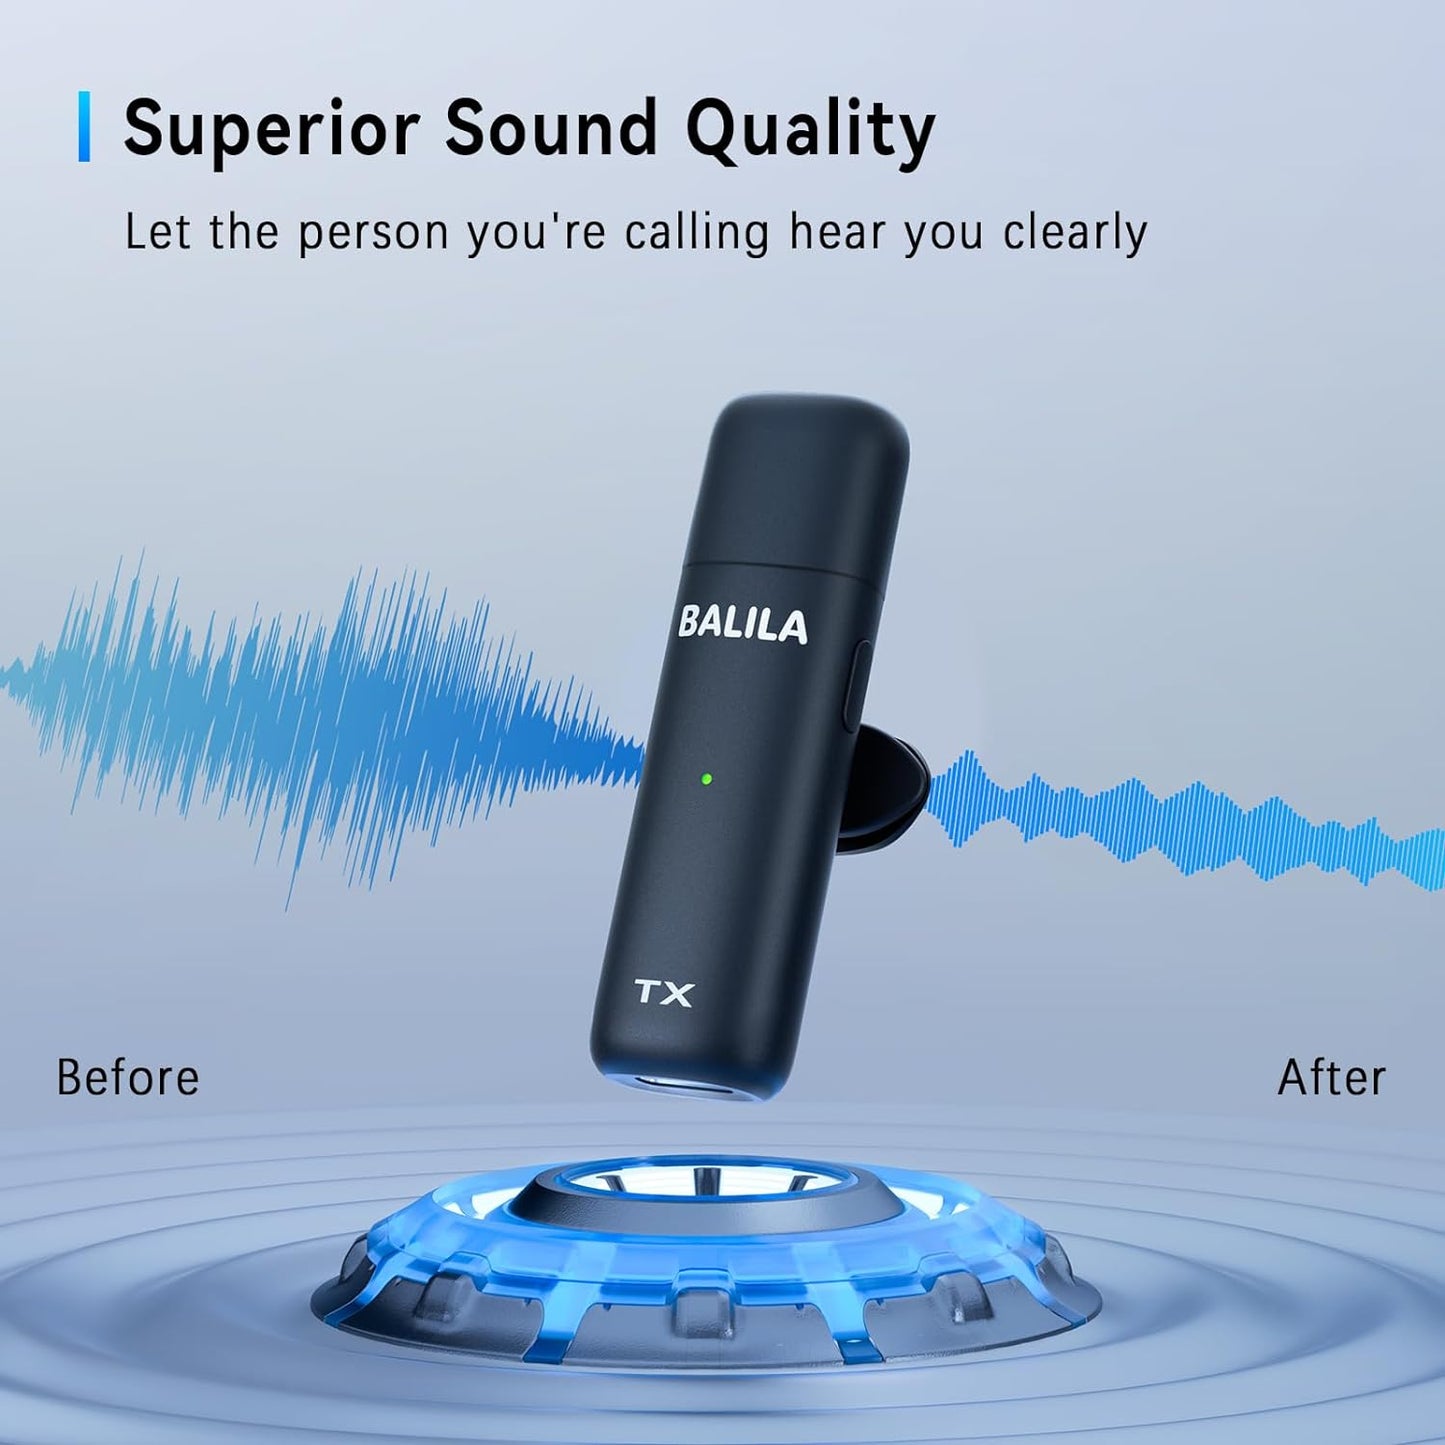 BALILA Conference Speaker and Microphone, Portable USB Speakerphone System for Large Group Room Meeting, Multi Mics, 360 Omnidirectional Voice Pickup, Mute, for Home Office Zoom Call Video